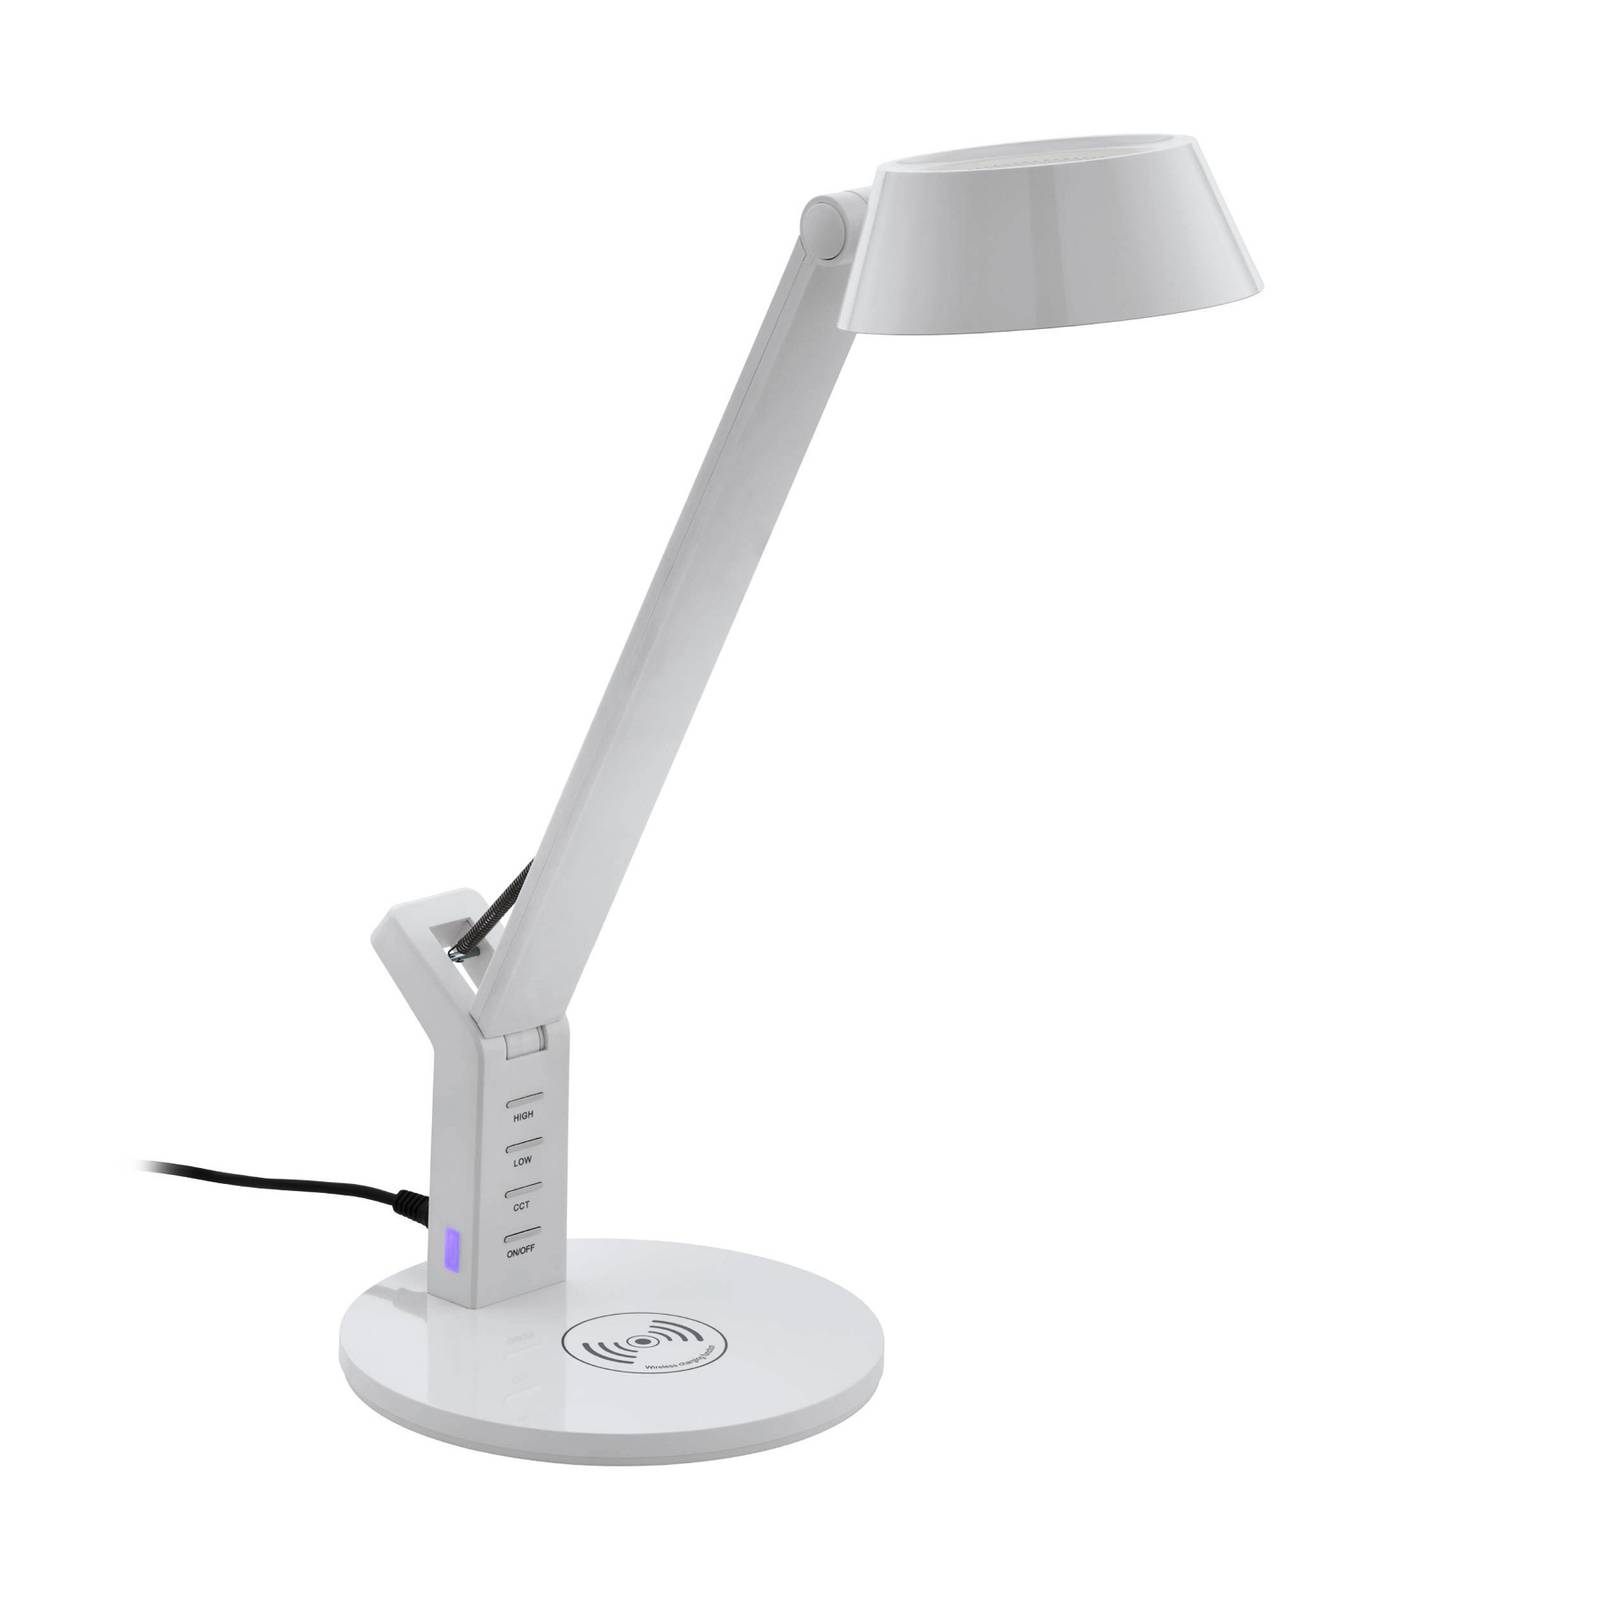 EGLO LED-Tischlampe Banderalo CCT dimmbar QI weiß